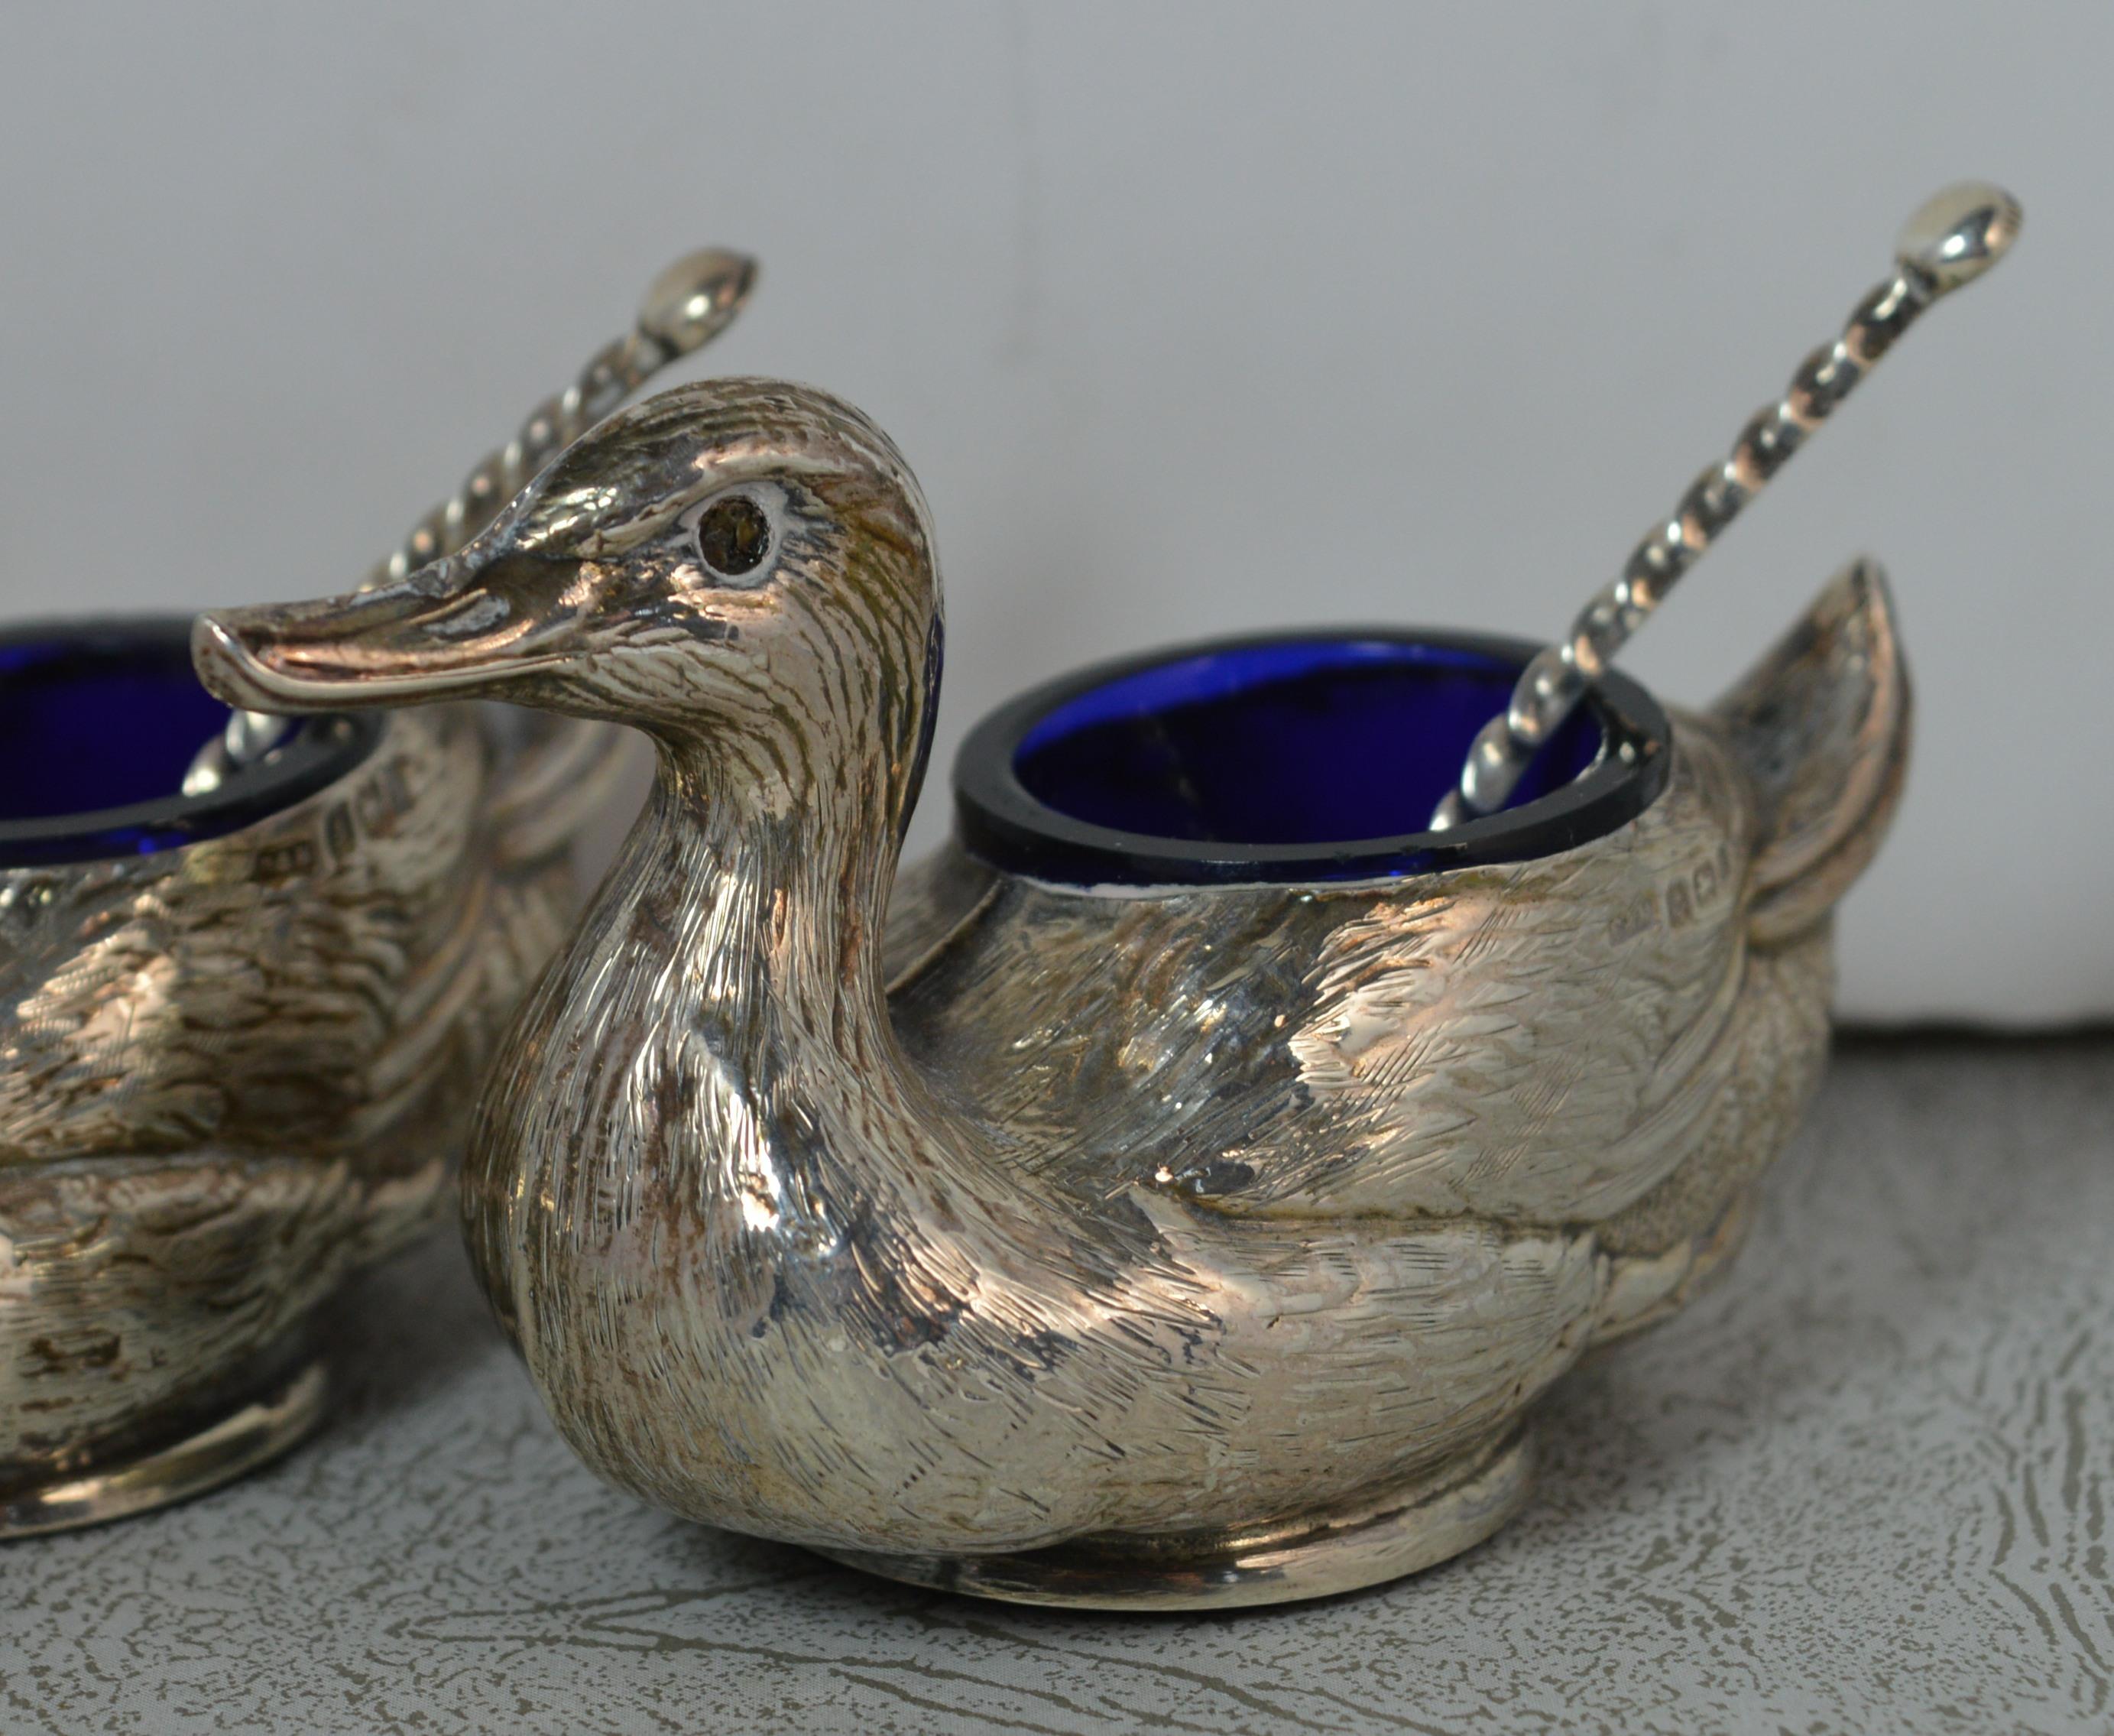 A pair of Edwardian period sterling silver salt and pepper cruets. English made. Stunningly made depicting a pair of ducks. Complete with a pair of shell bowl salt spoons by the same makers.

Hallmarks ; Lion, Birmingham anchor, date letter g,